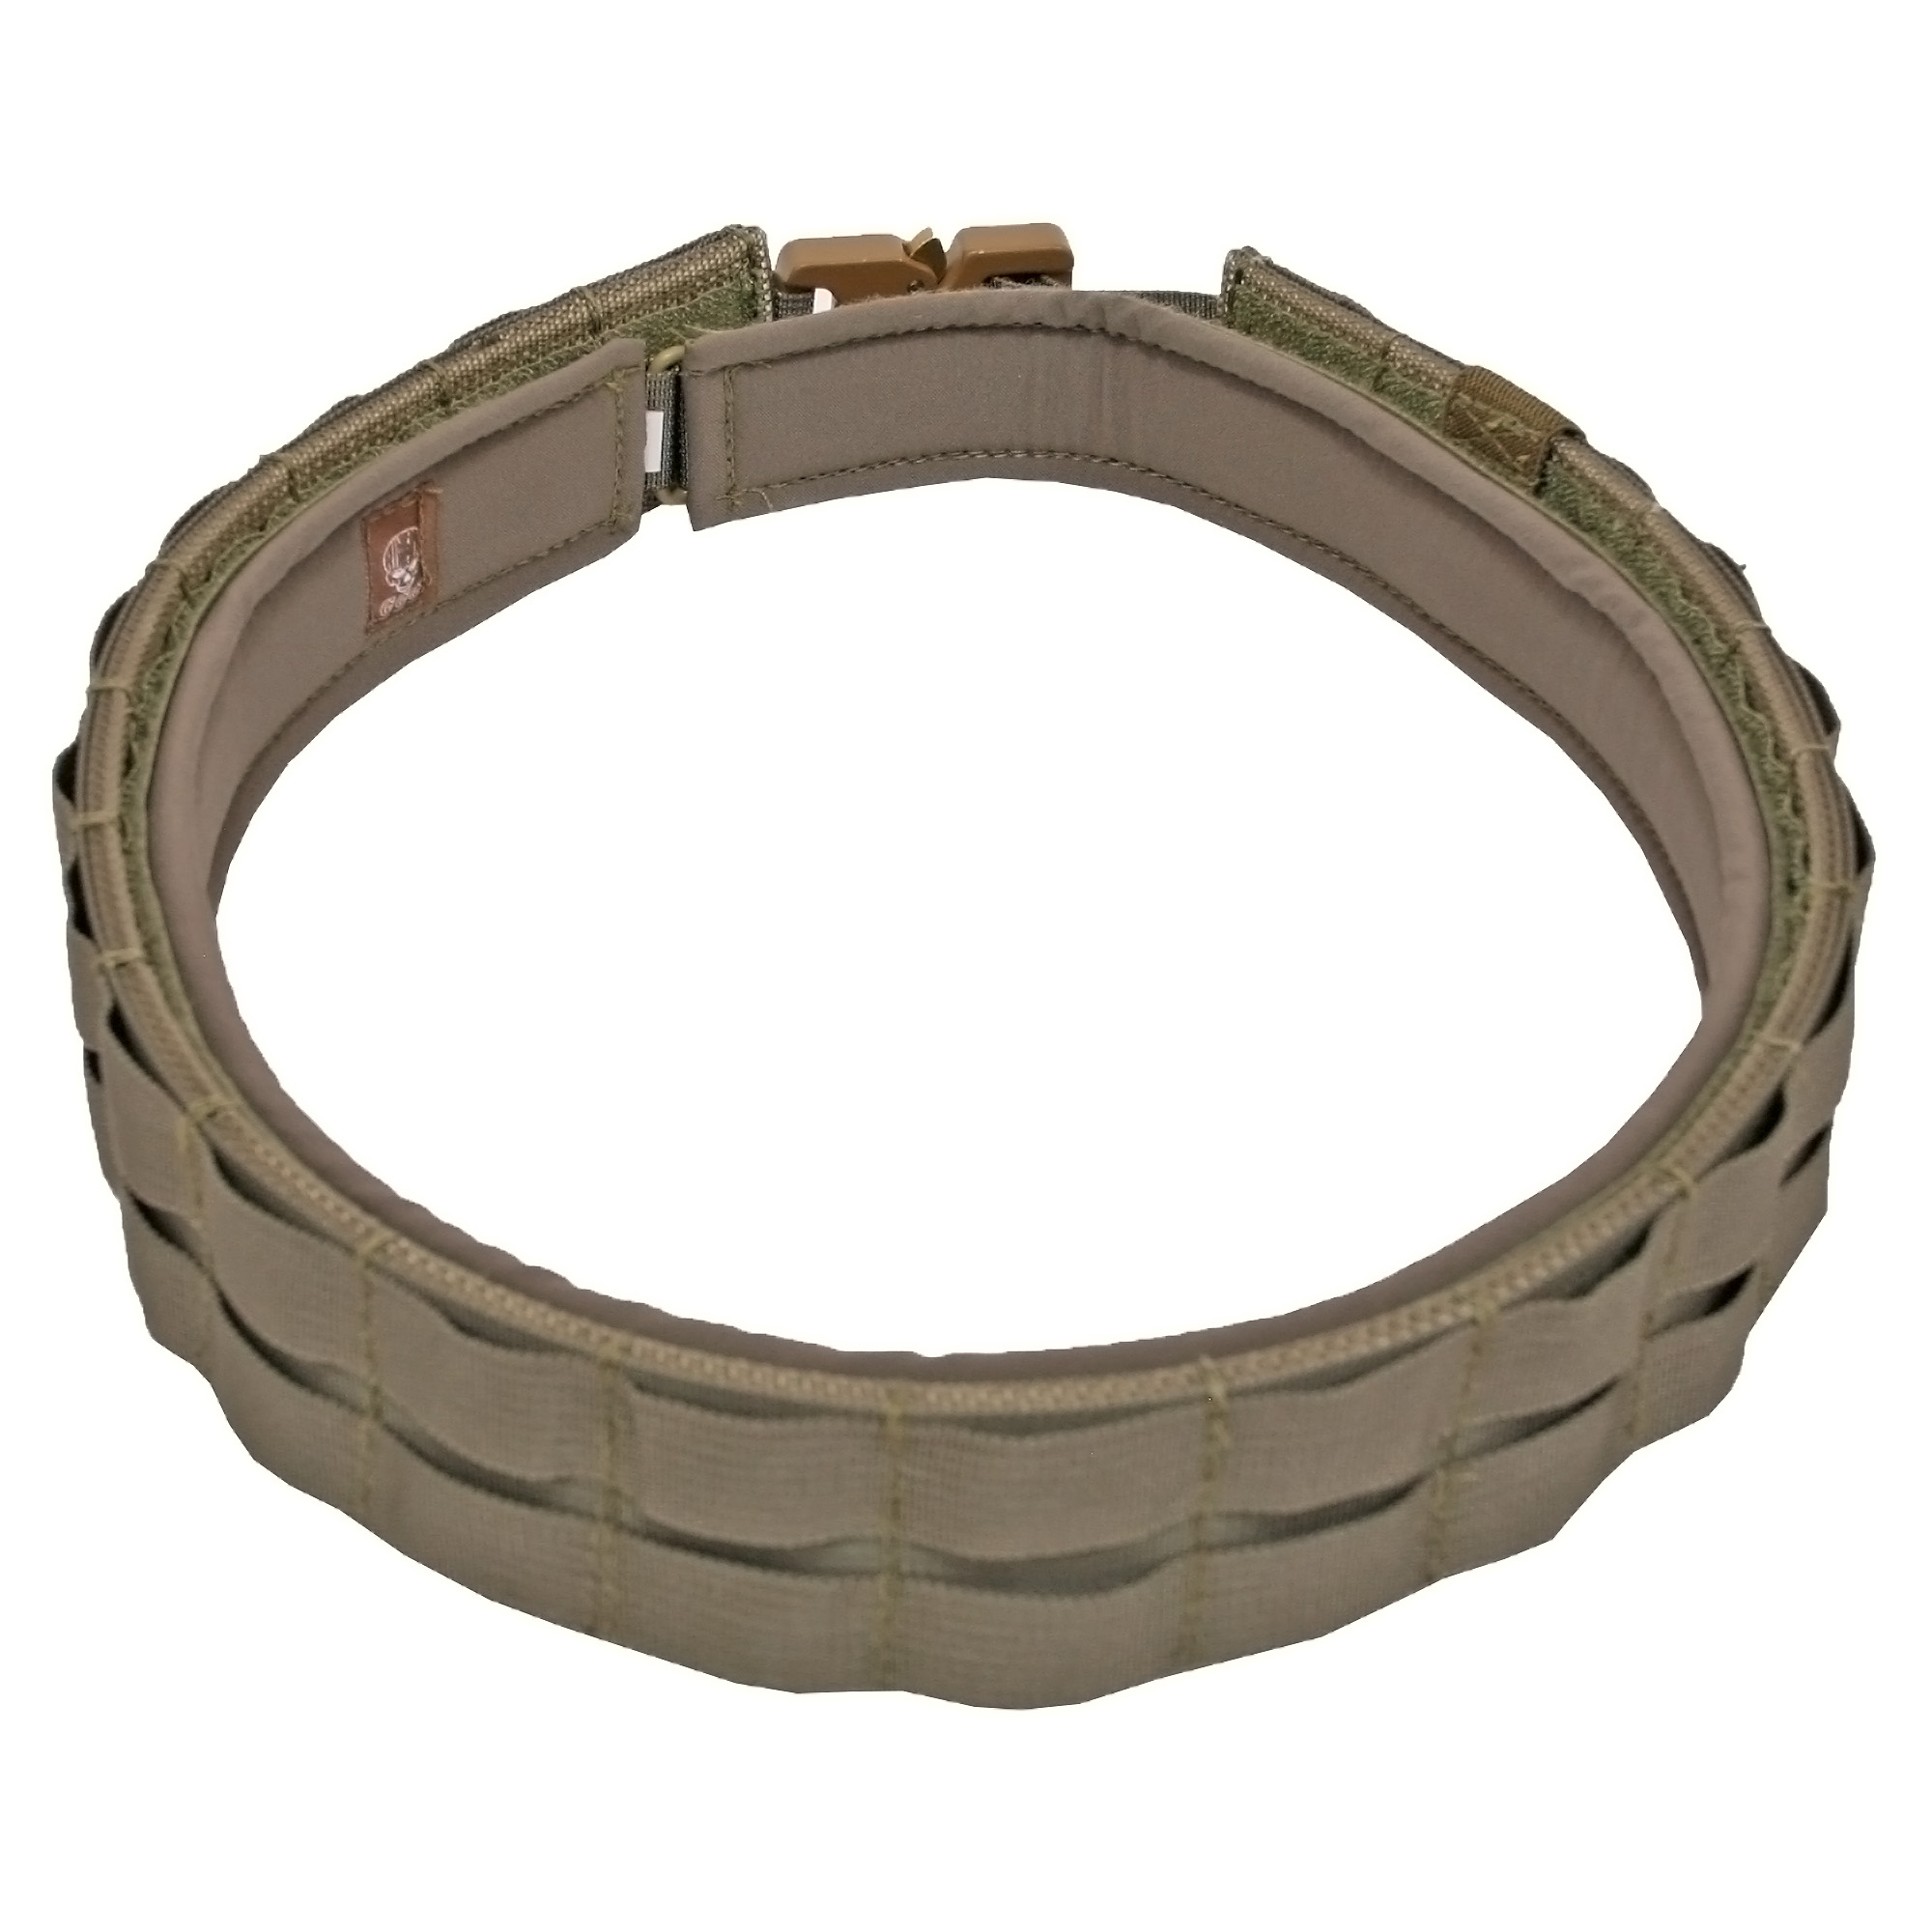 Grey Ghost Gear 7011-14 UGF Battle Mens S 34-36/" Coyote Padded Tactical Belt